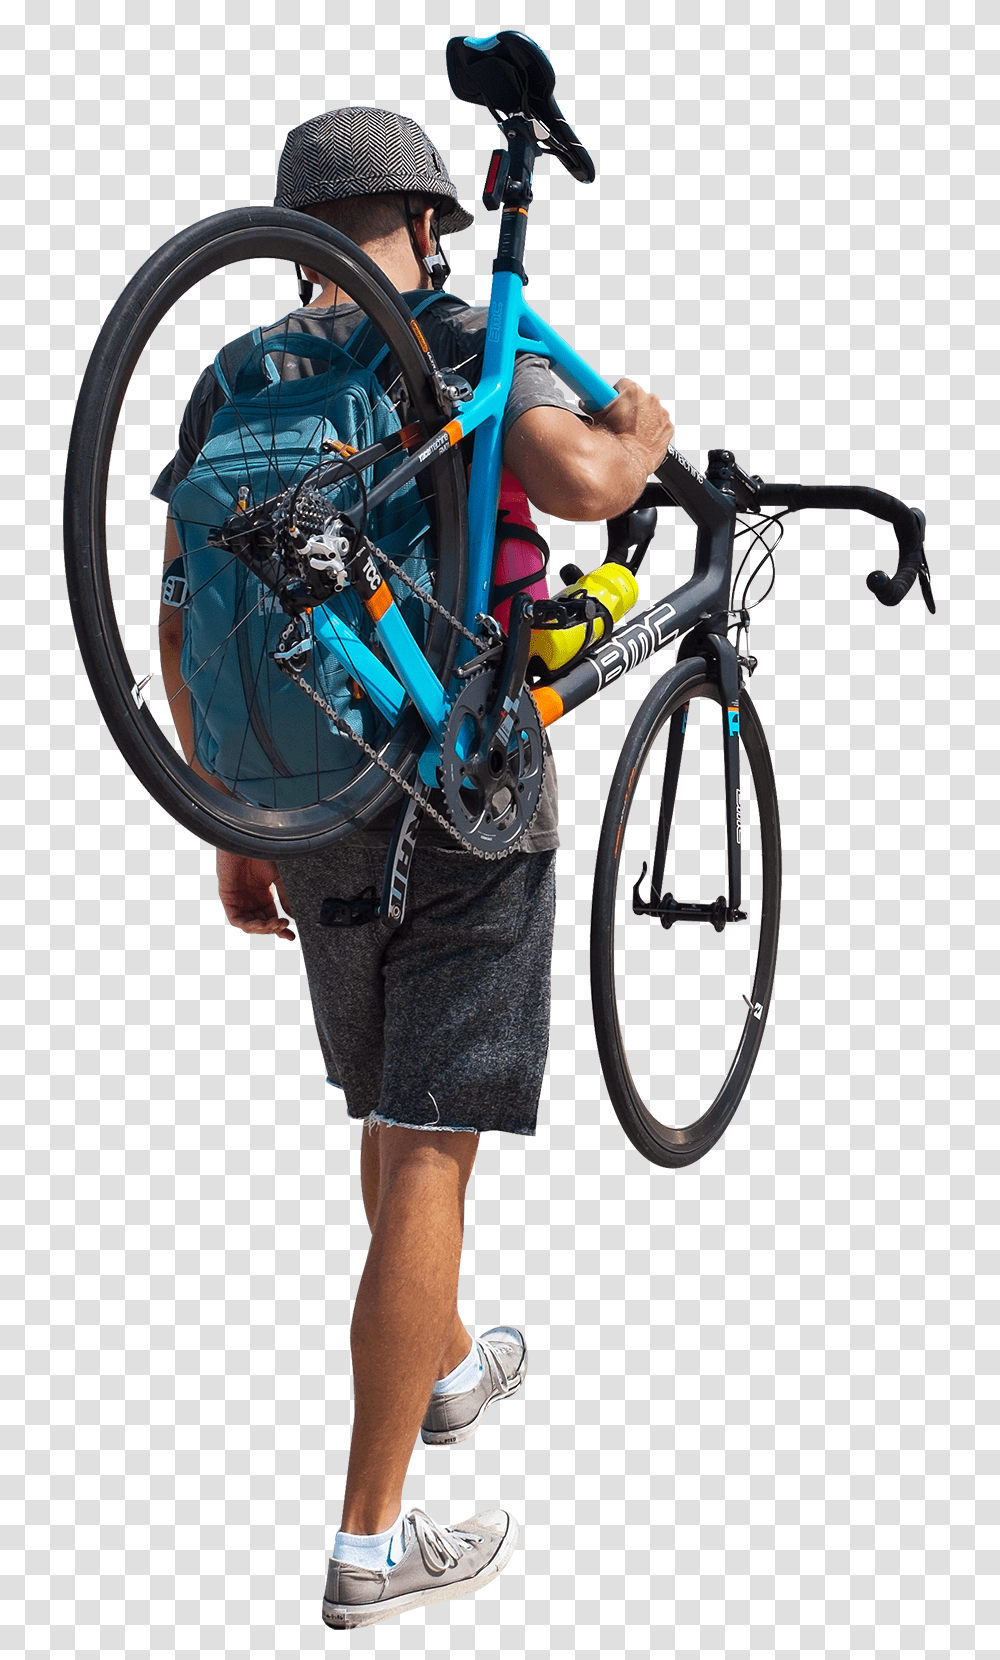 Bike On The Beach Image Person With Bike, Wheel, Machine, Bicycle, Vehicle Transparent Png